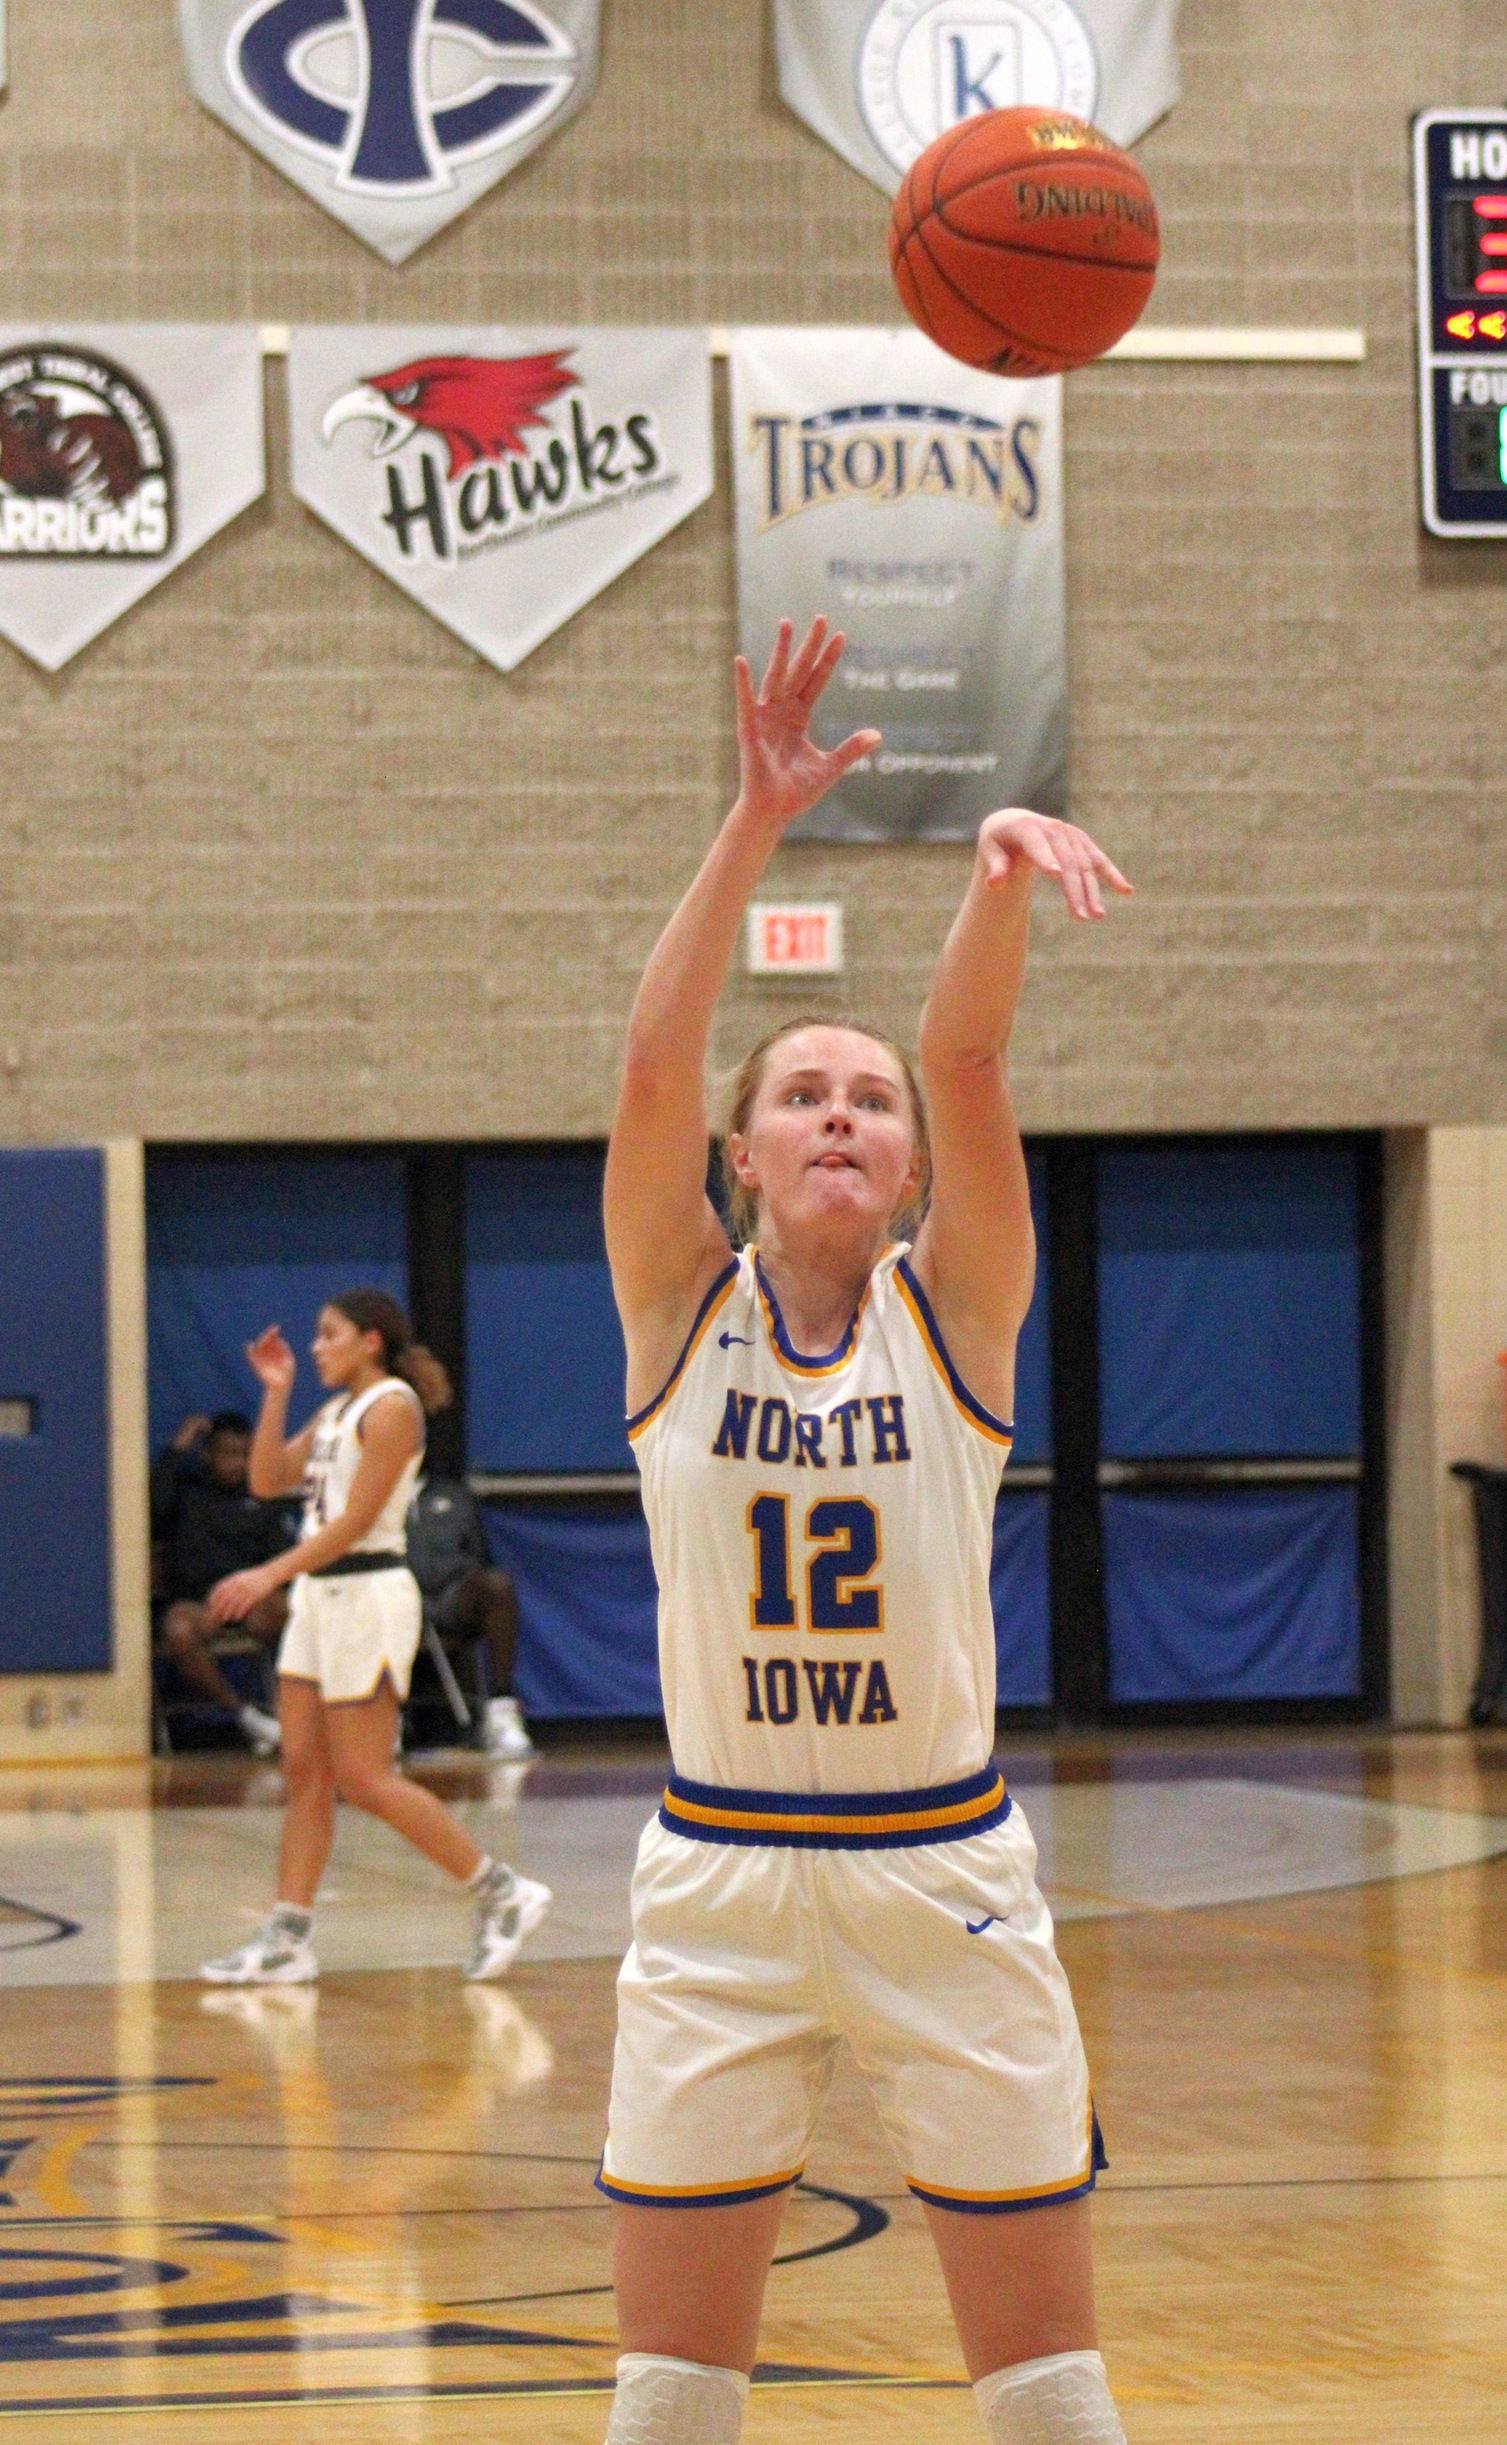 NIACC's Alyssa Hames has been selected as the ICCAC player of the week for the week of Dec. 6-12.